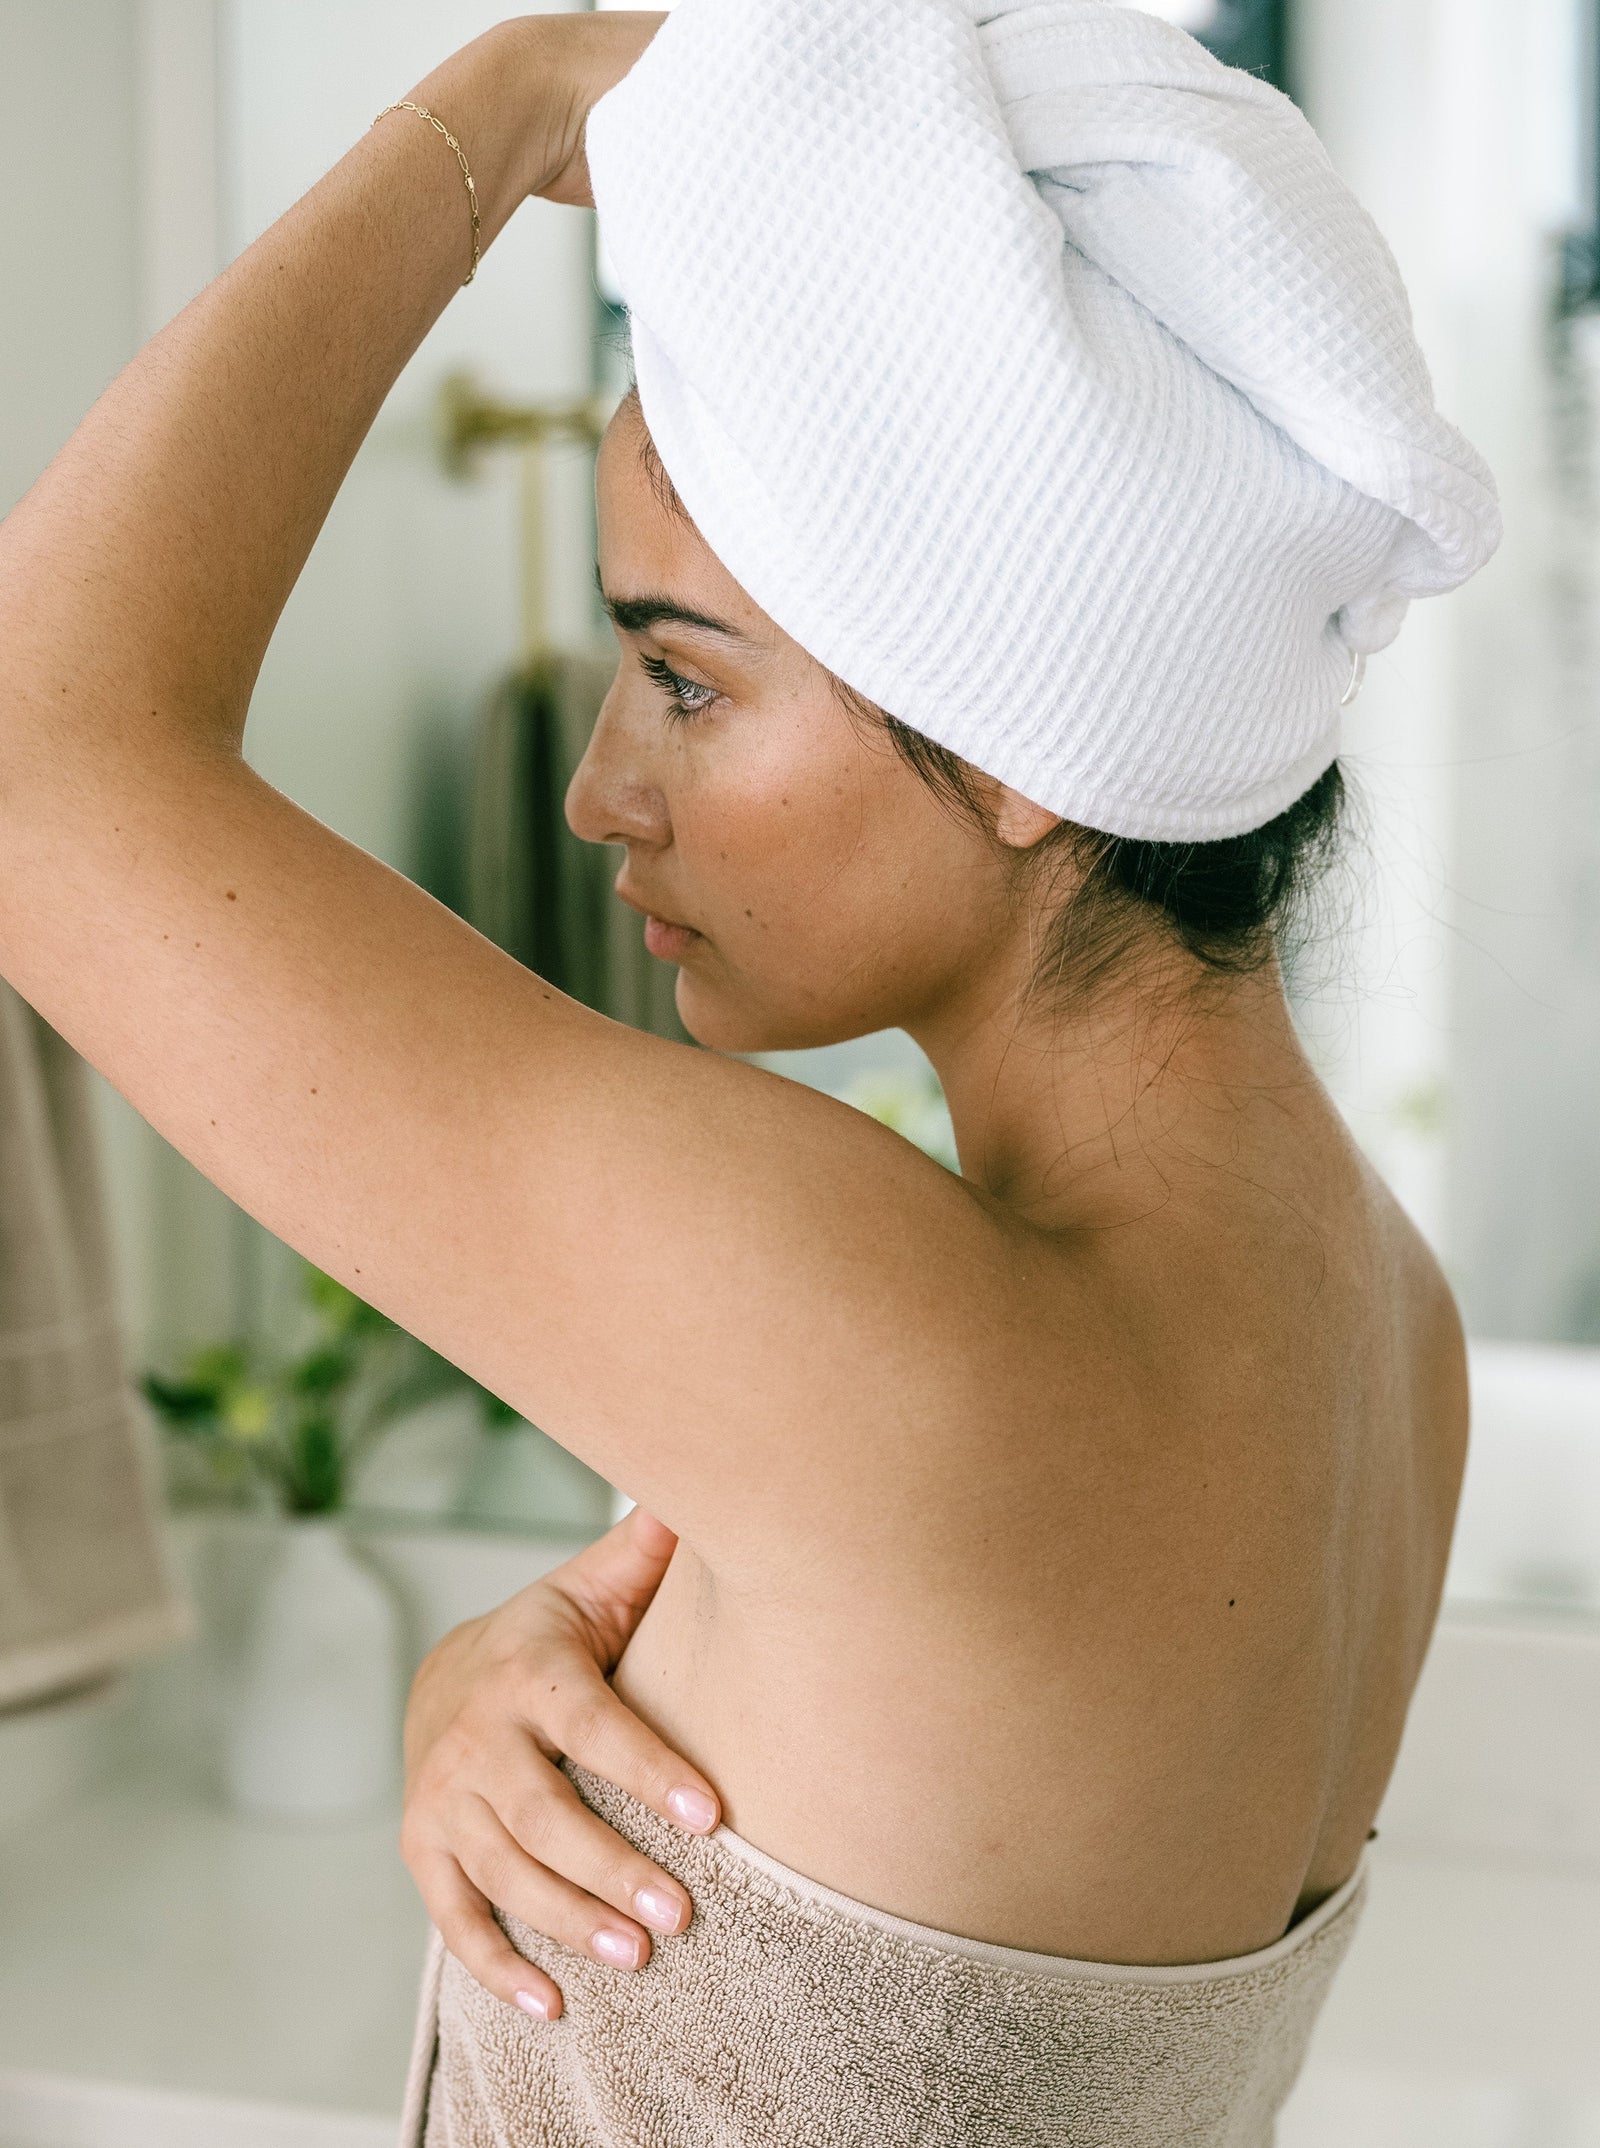 White Waffle Hair Towel. The hair towel is shown being worn by a woman who is in a bathroom. 